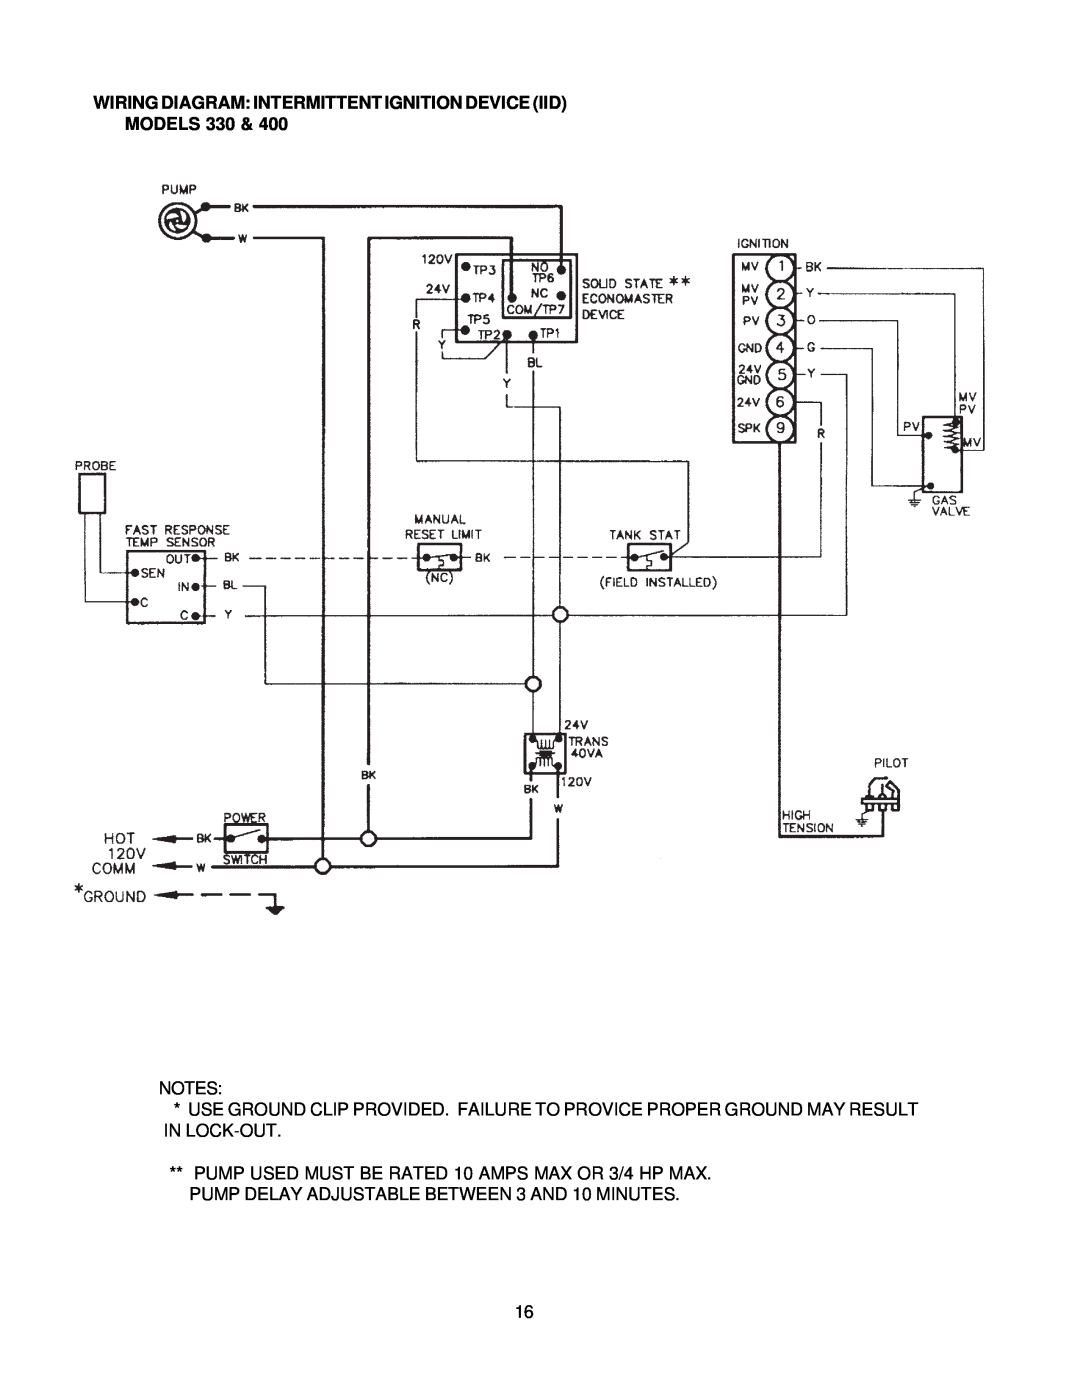 Raypak 260-401 manual Wiring Diagram Intermittent Ignition Device Iid, Models 